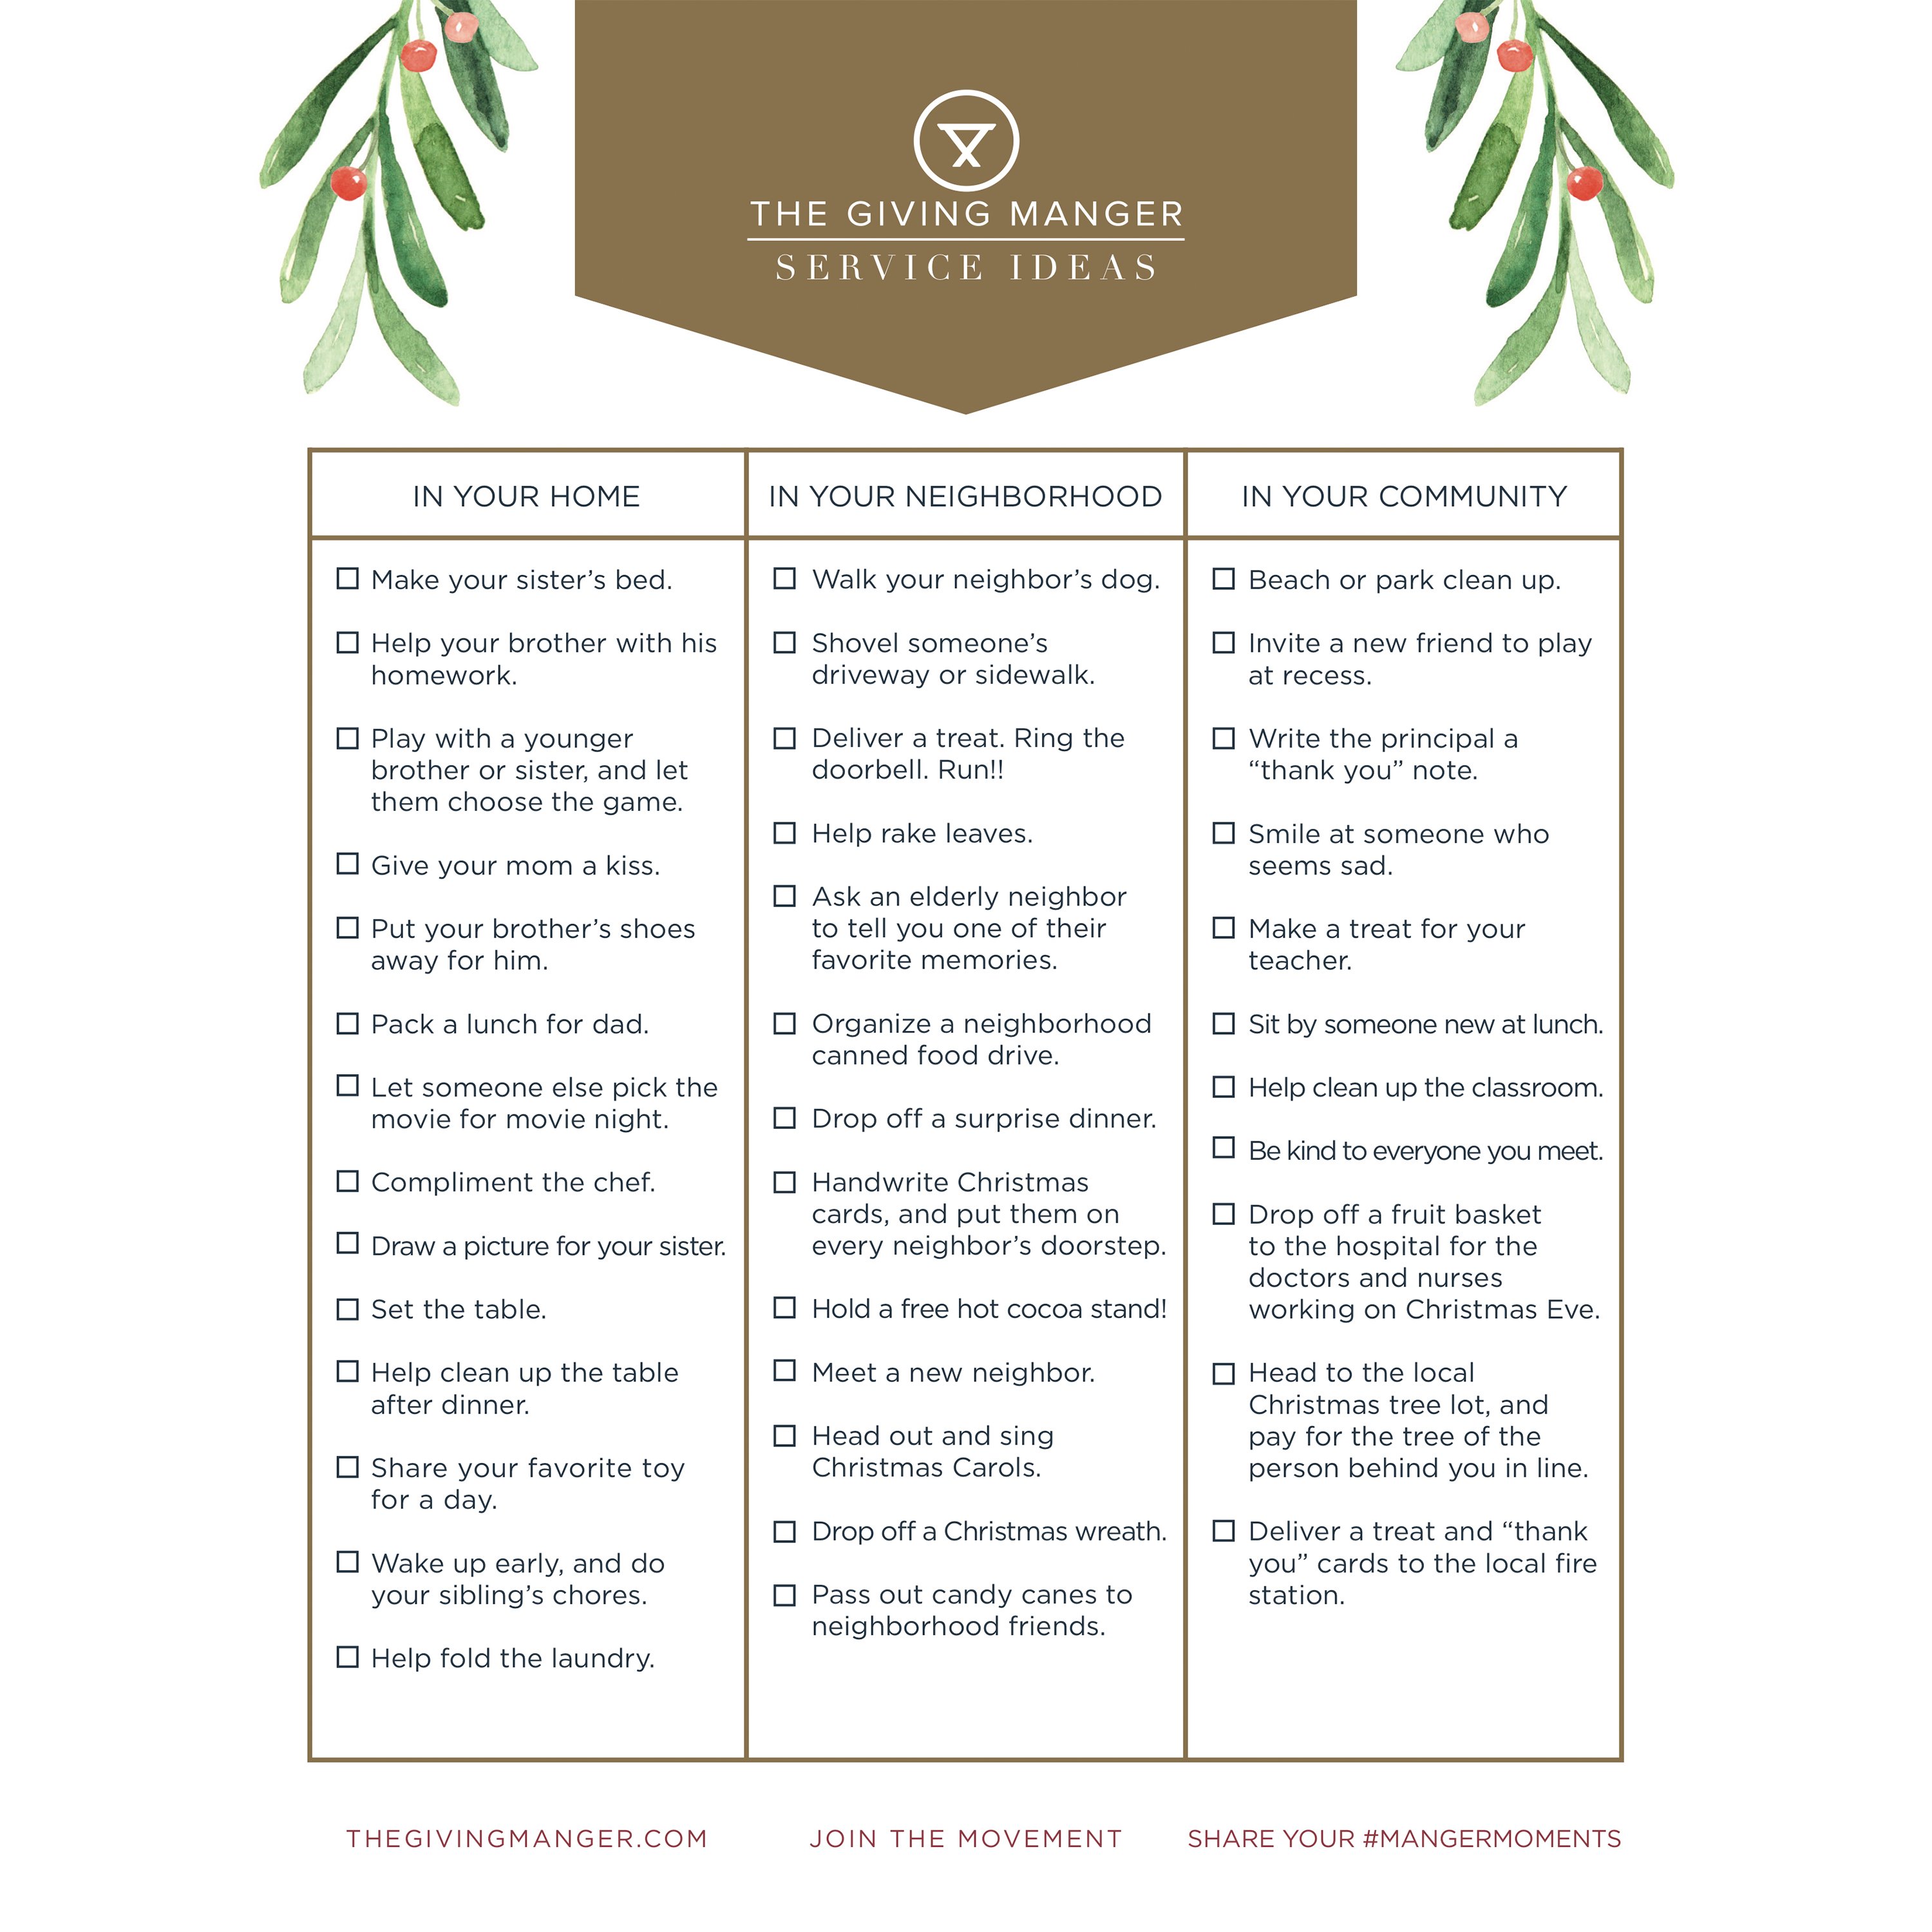 Image of Service Ideas for Home, Neighborhood and Community - Free Printable